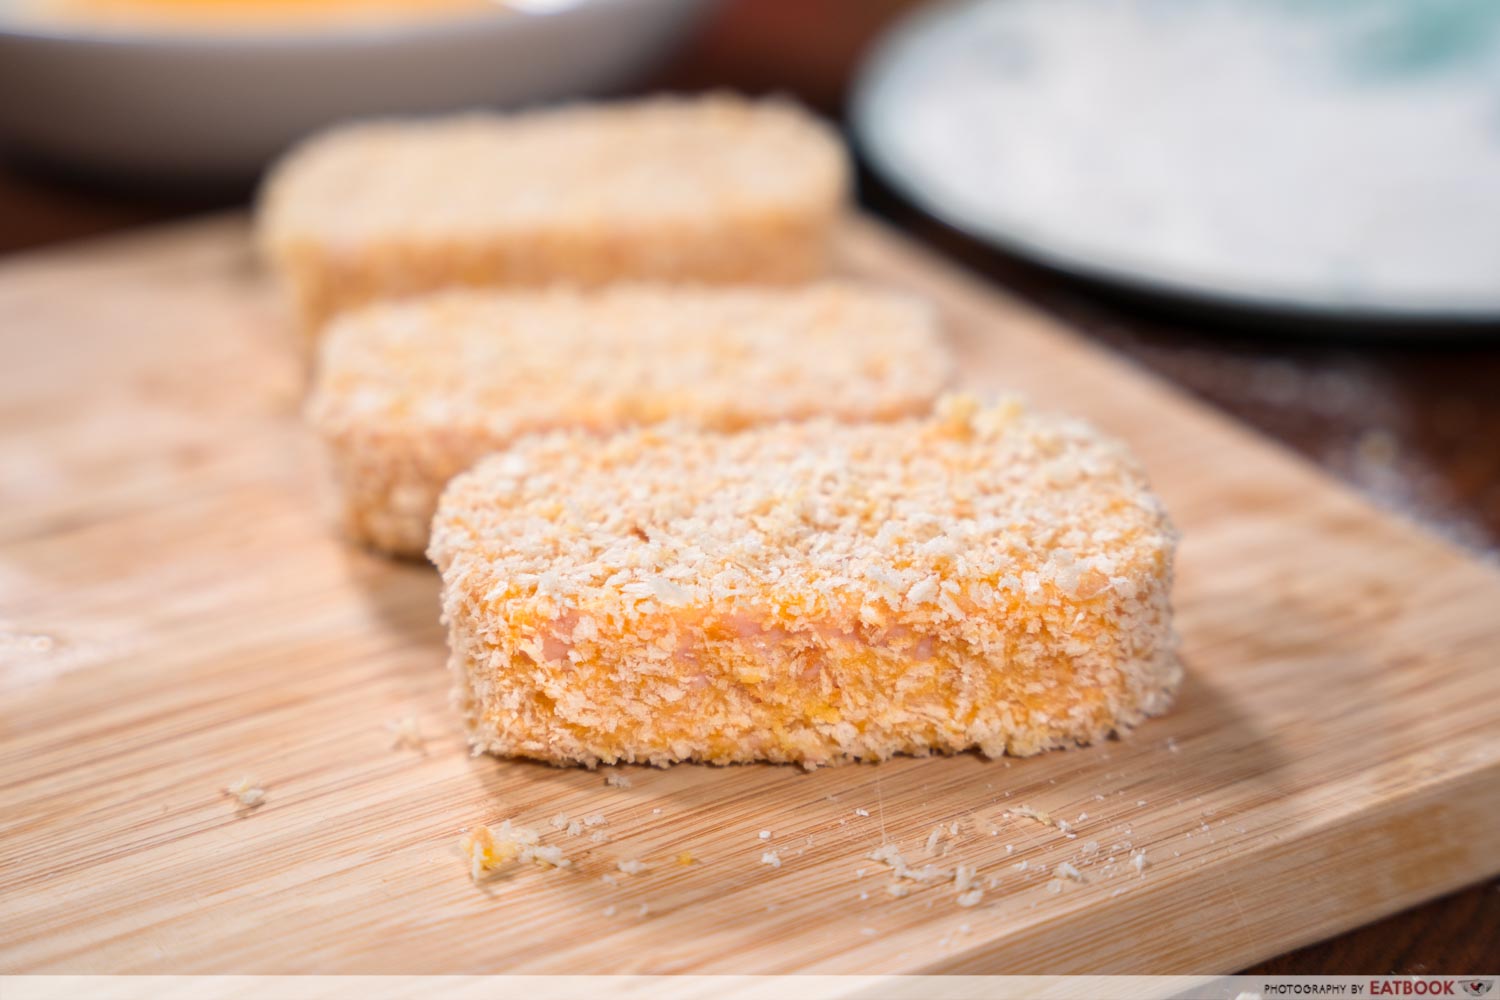 Canned food recipes - luncheon meat katsu